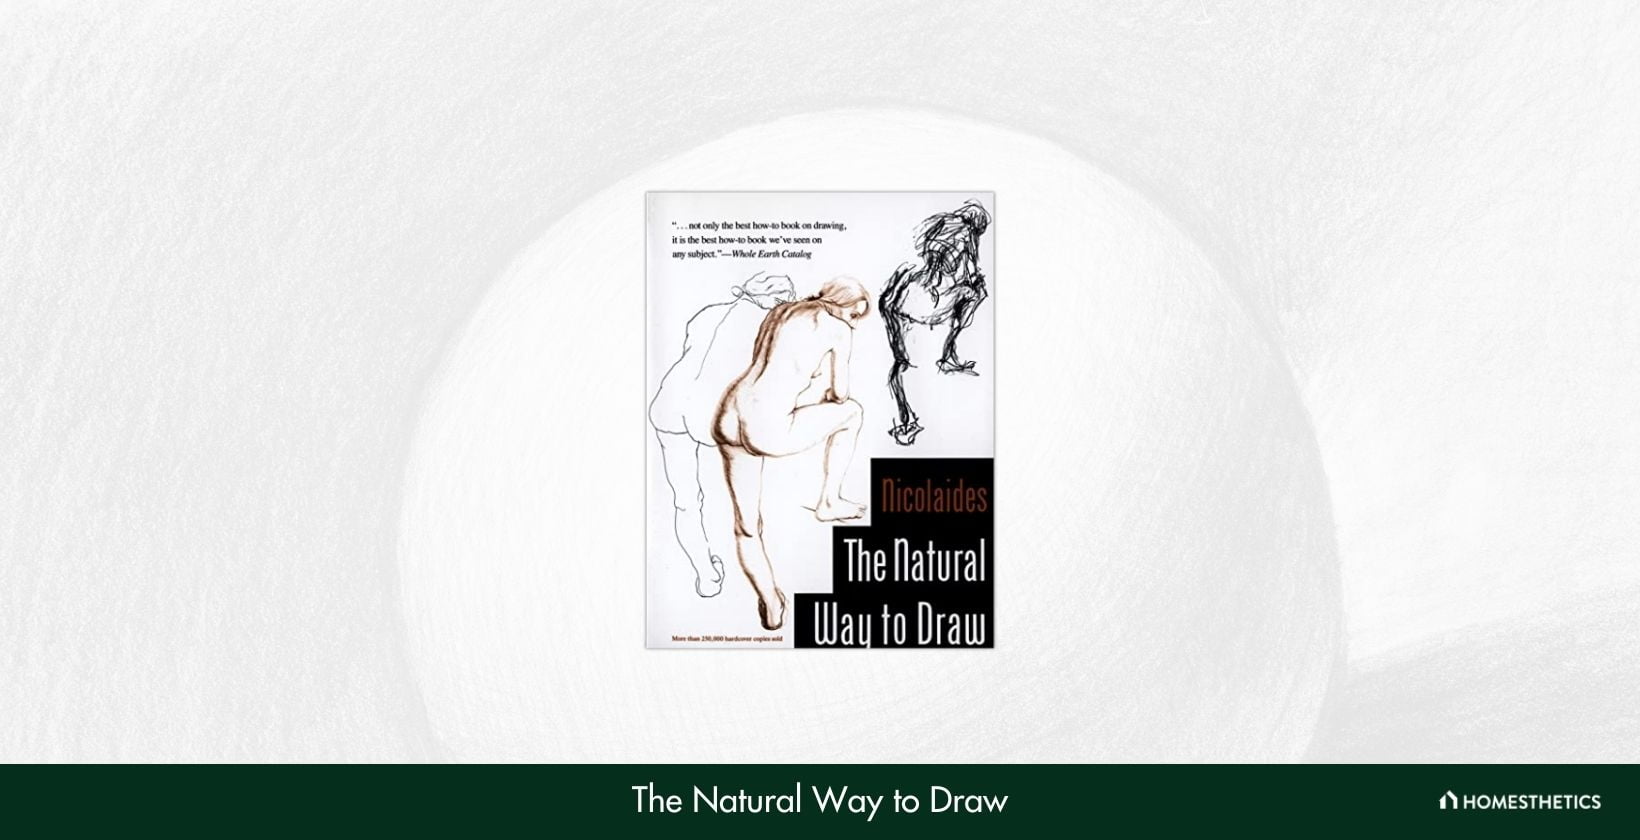 The Natural Way to Draw A Working Plan for Art Study by Kimon Nicolaides